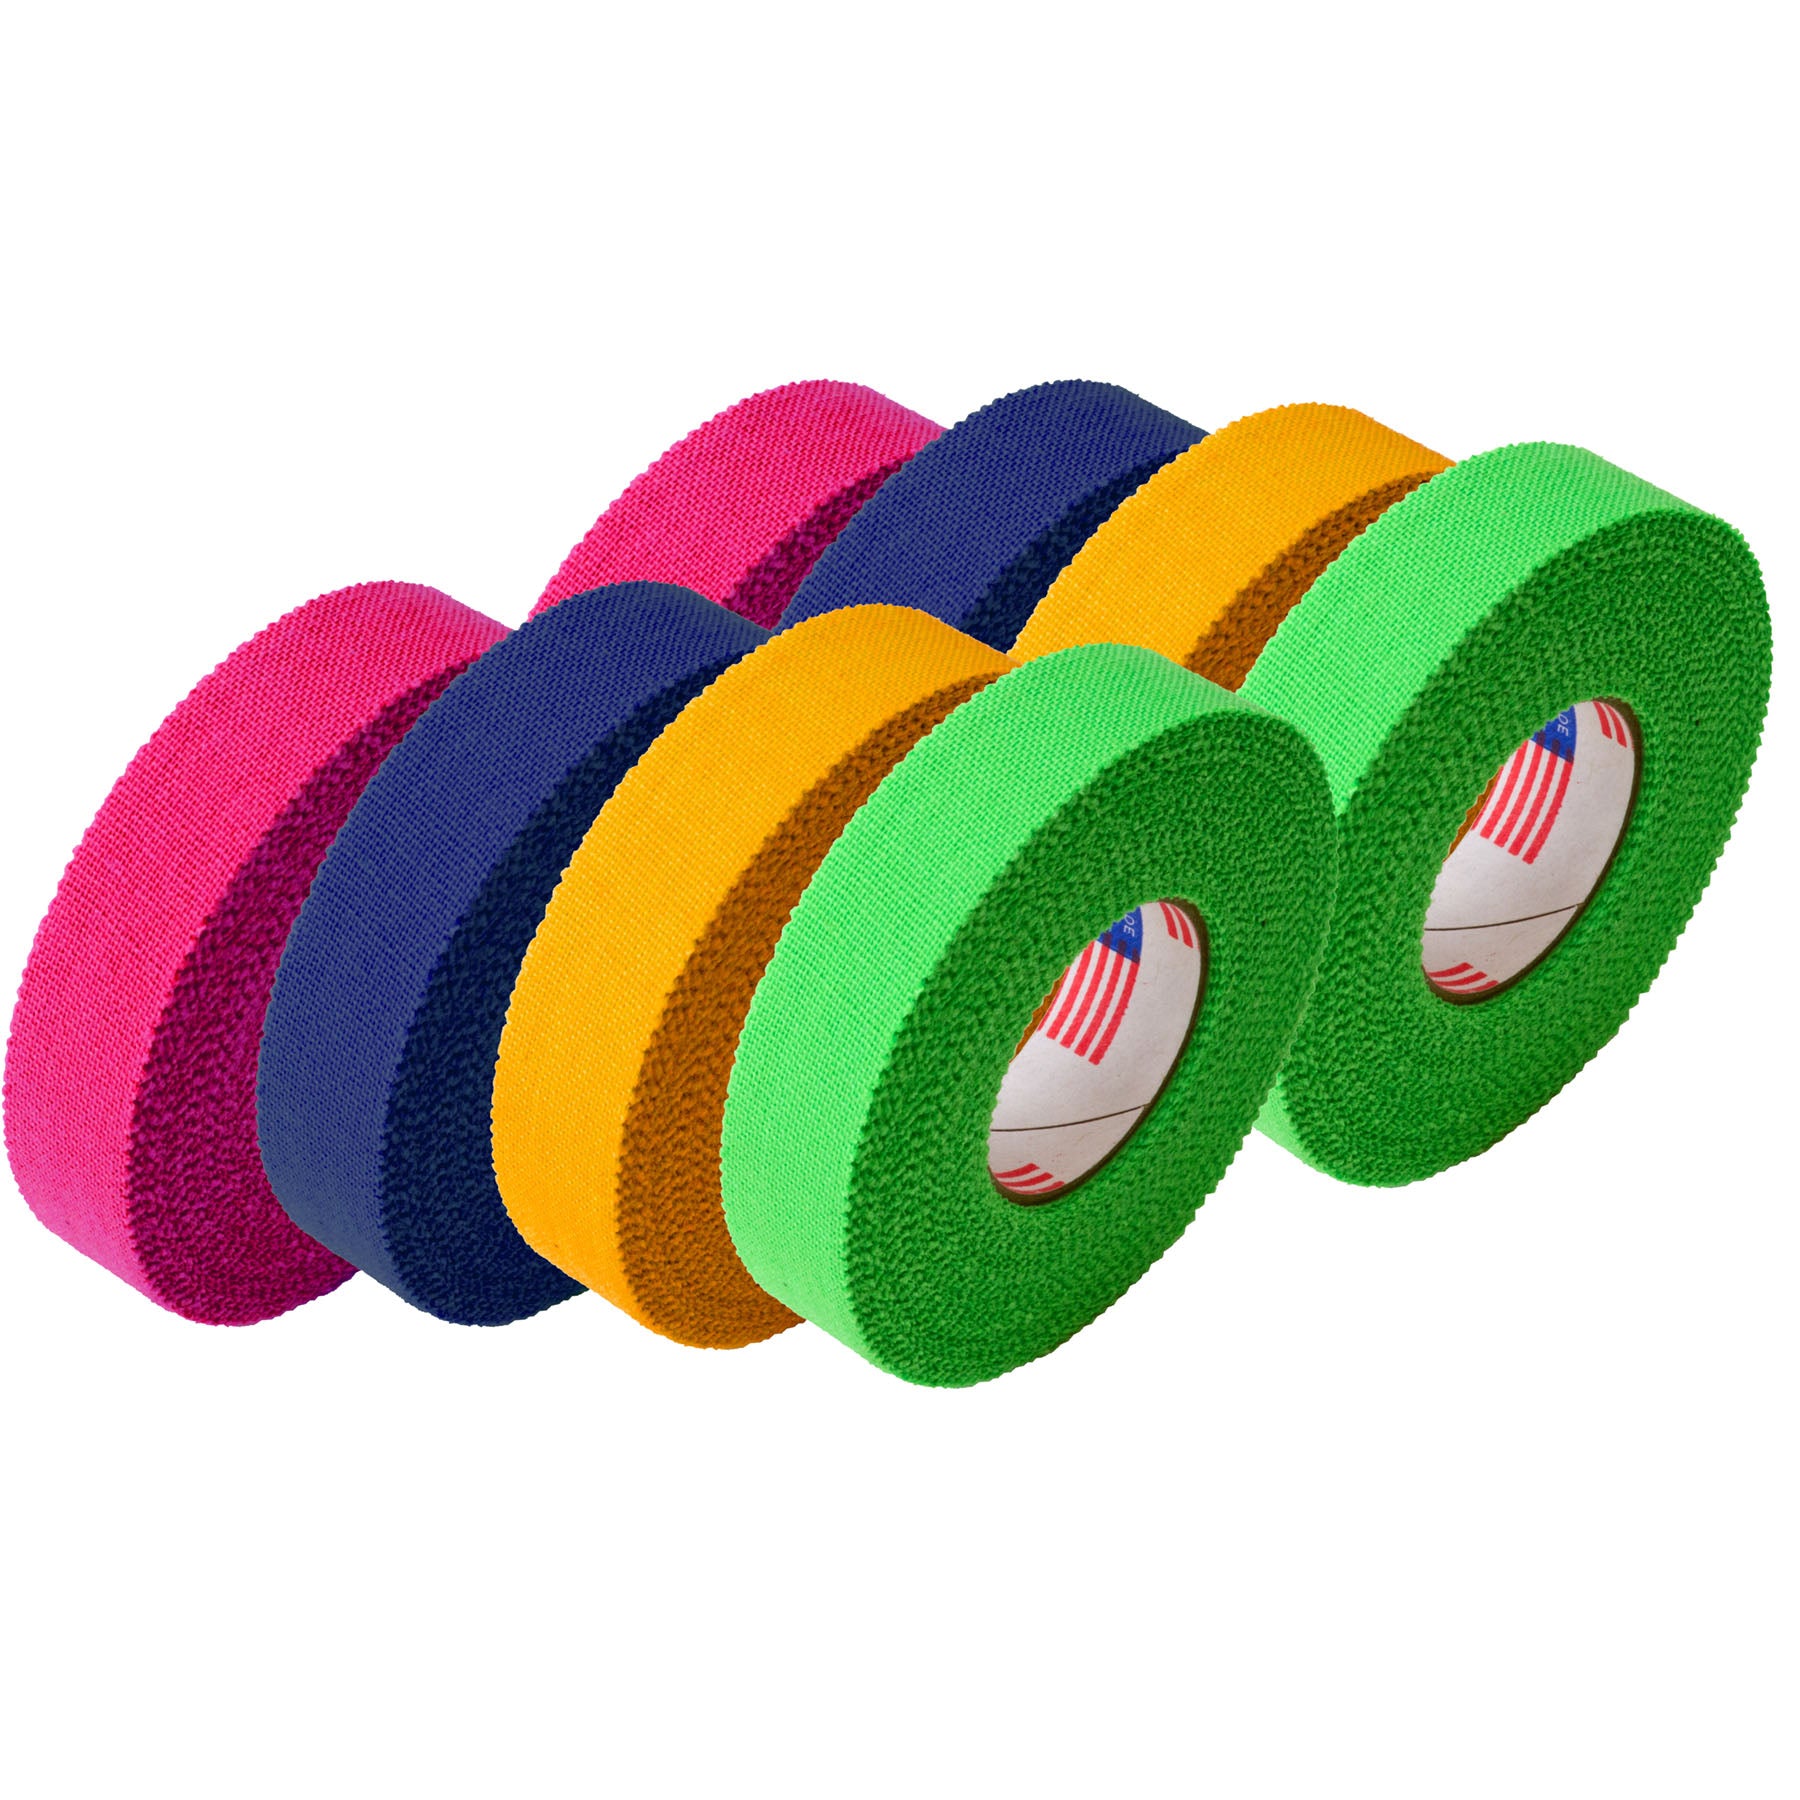 a photo of all the colors of metolius finger tape